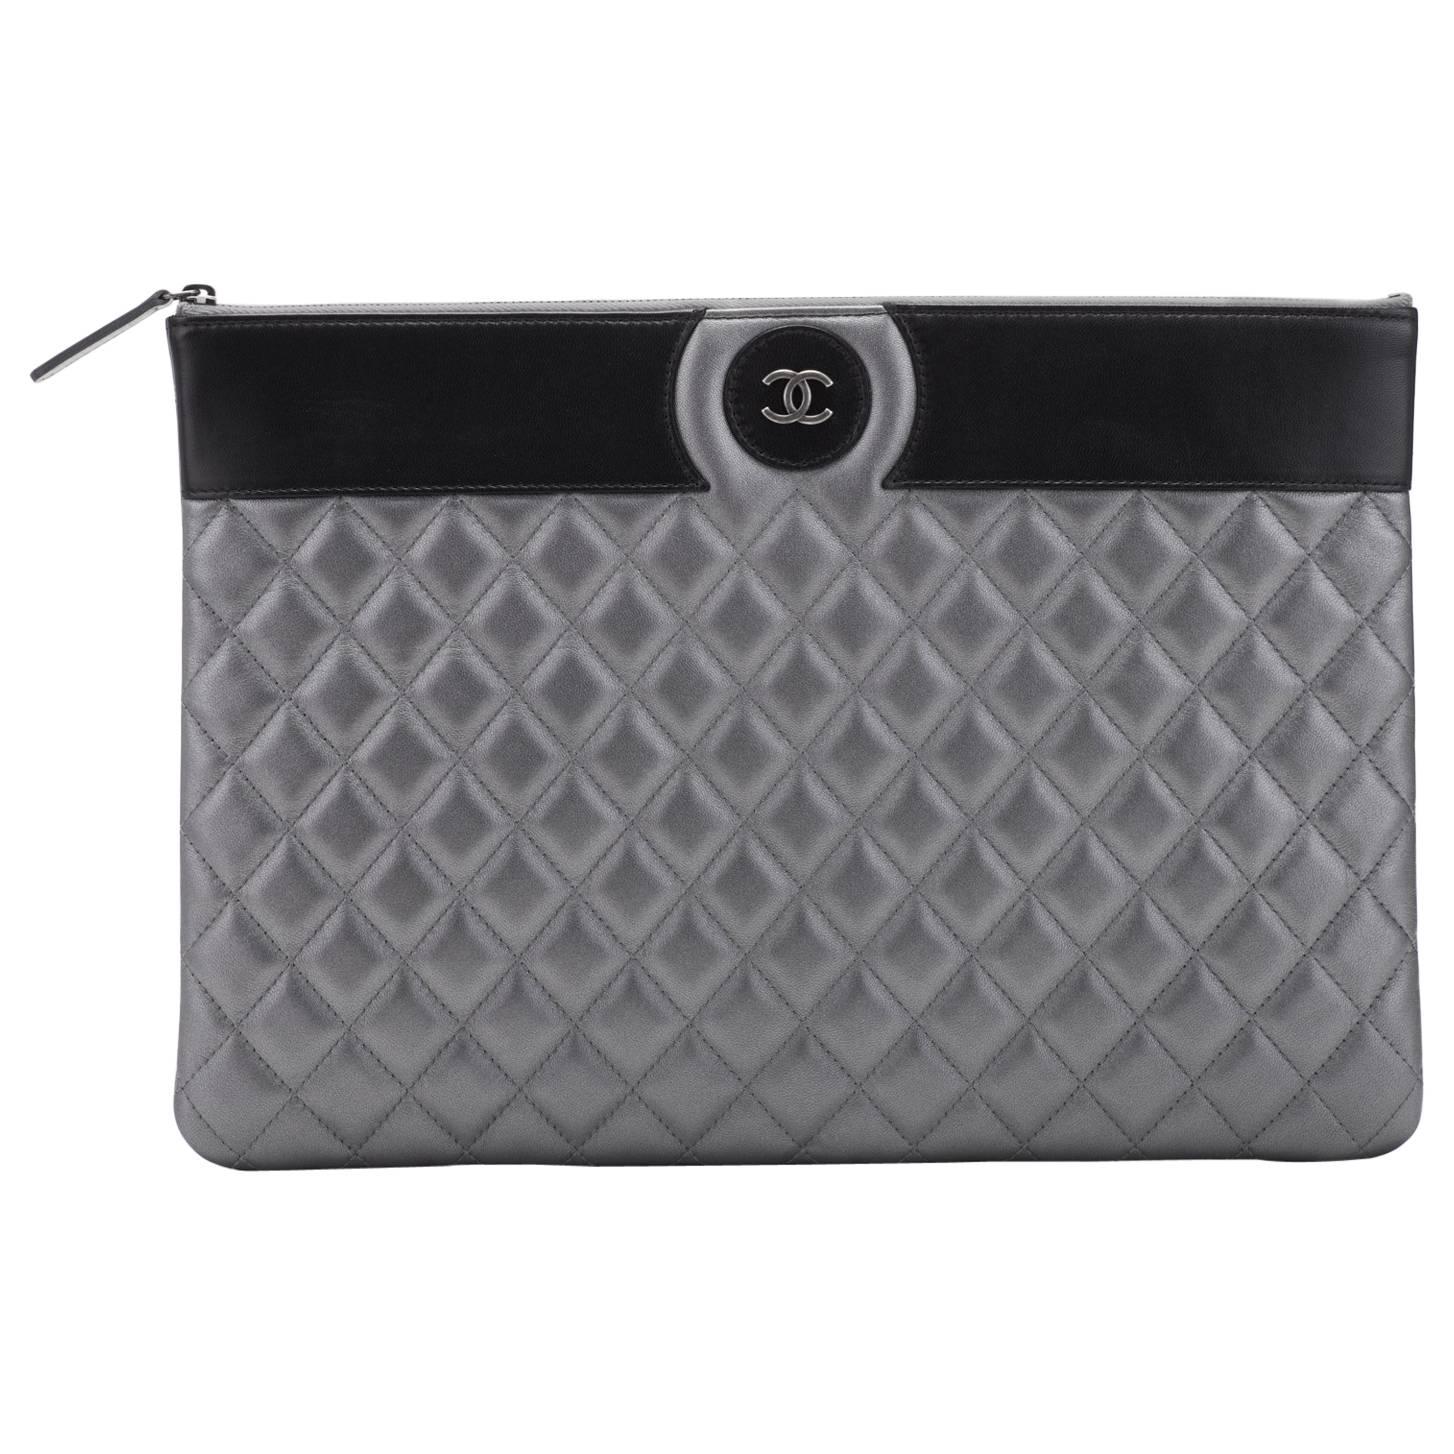 New Chanel Large Pewter Black Clutch For Sale